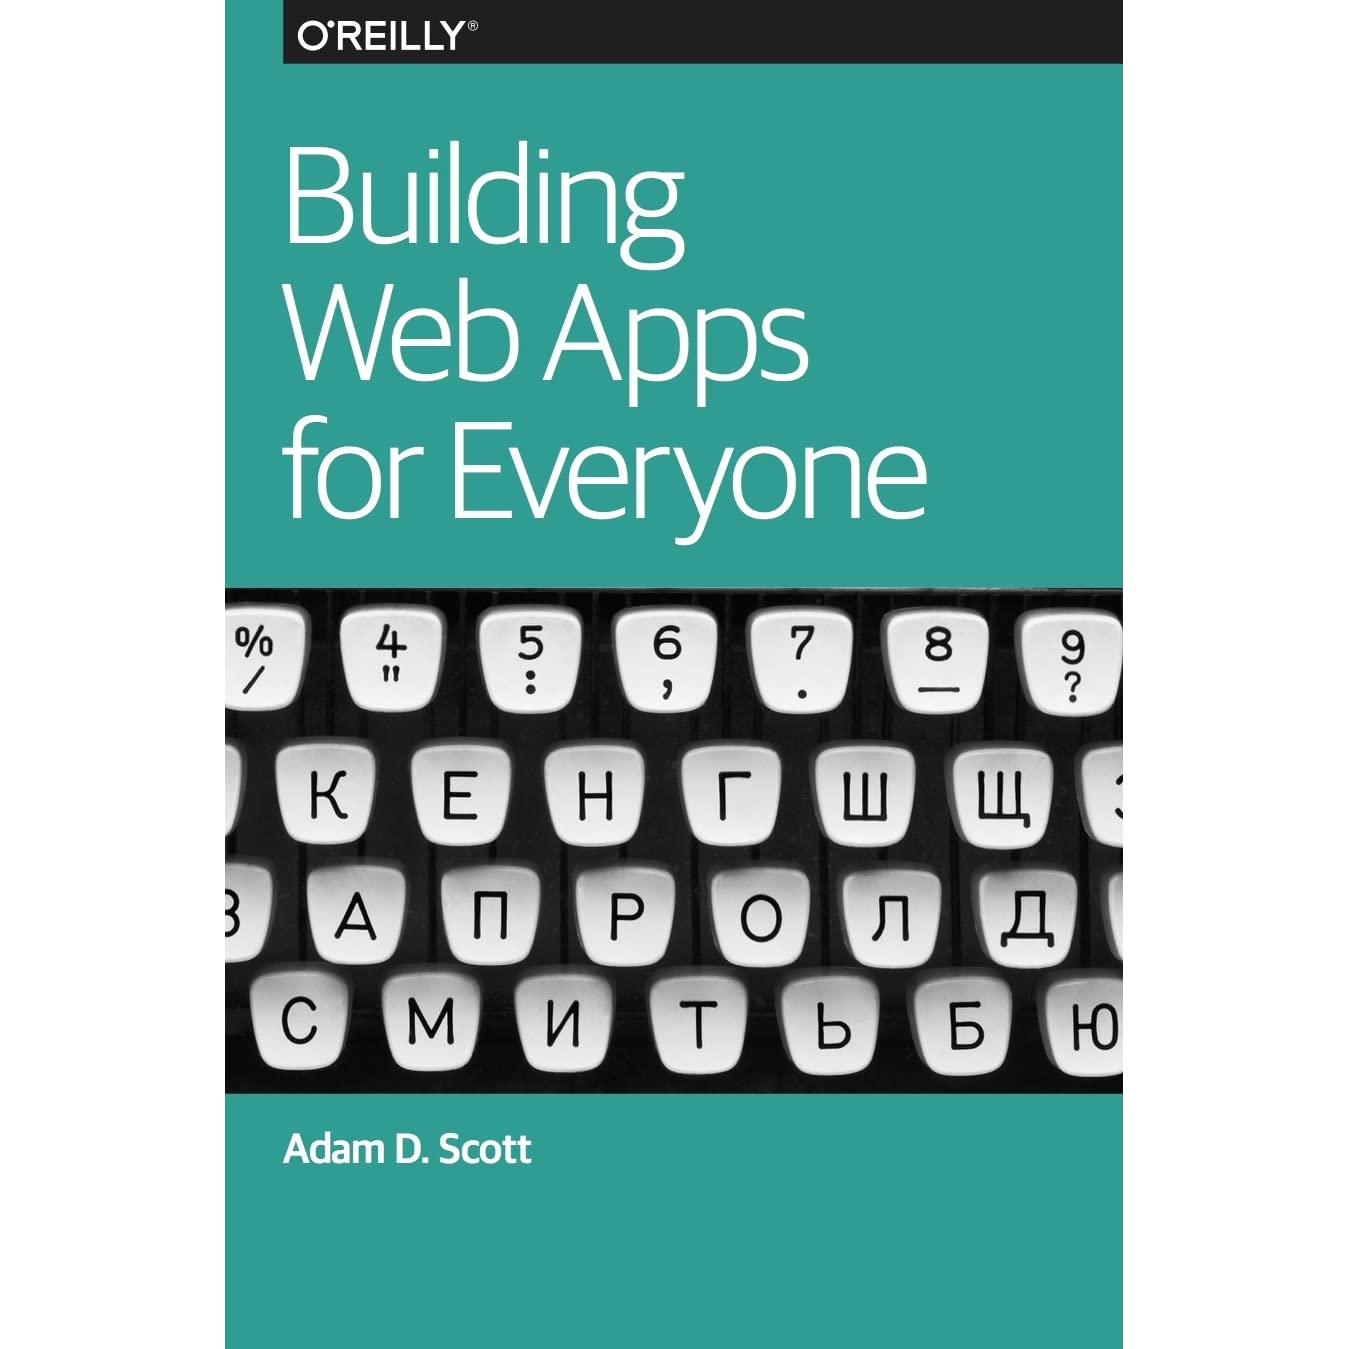 Building Web Apps for Everyone, 2016 by Adam D. Scott